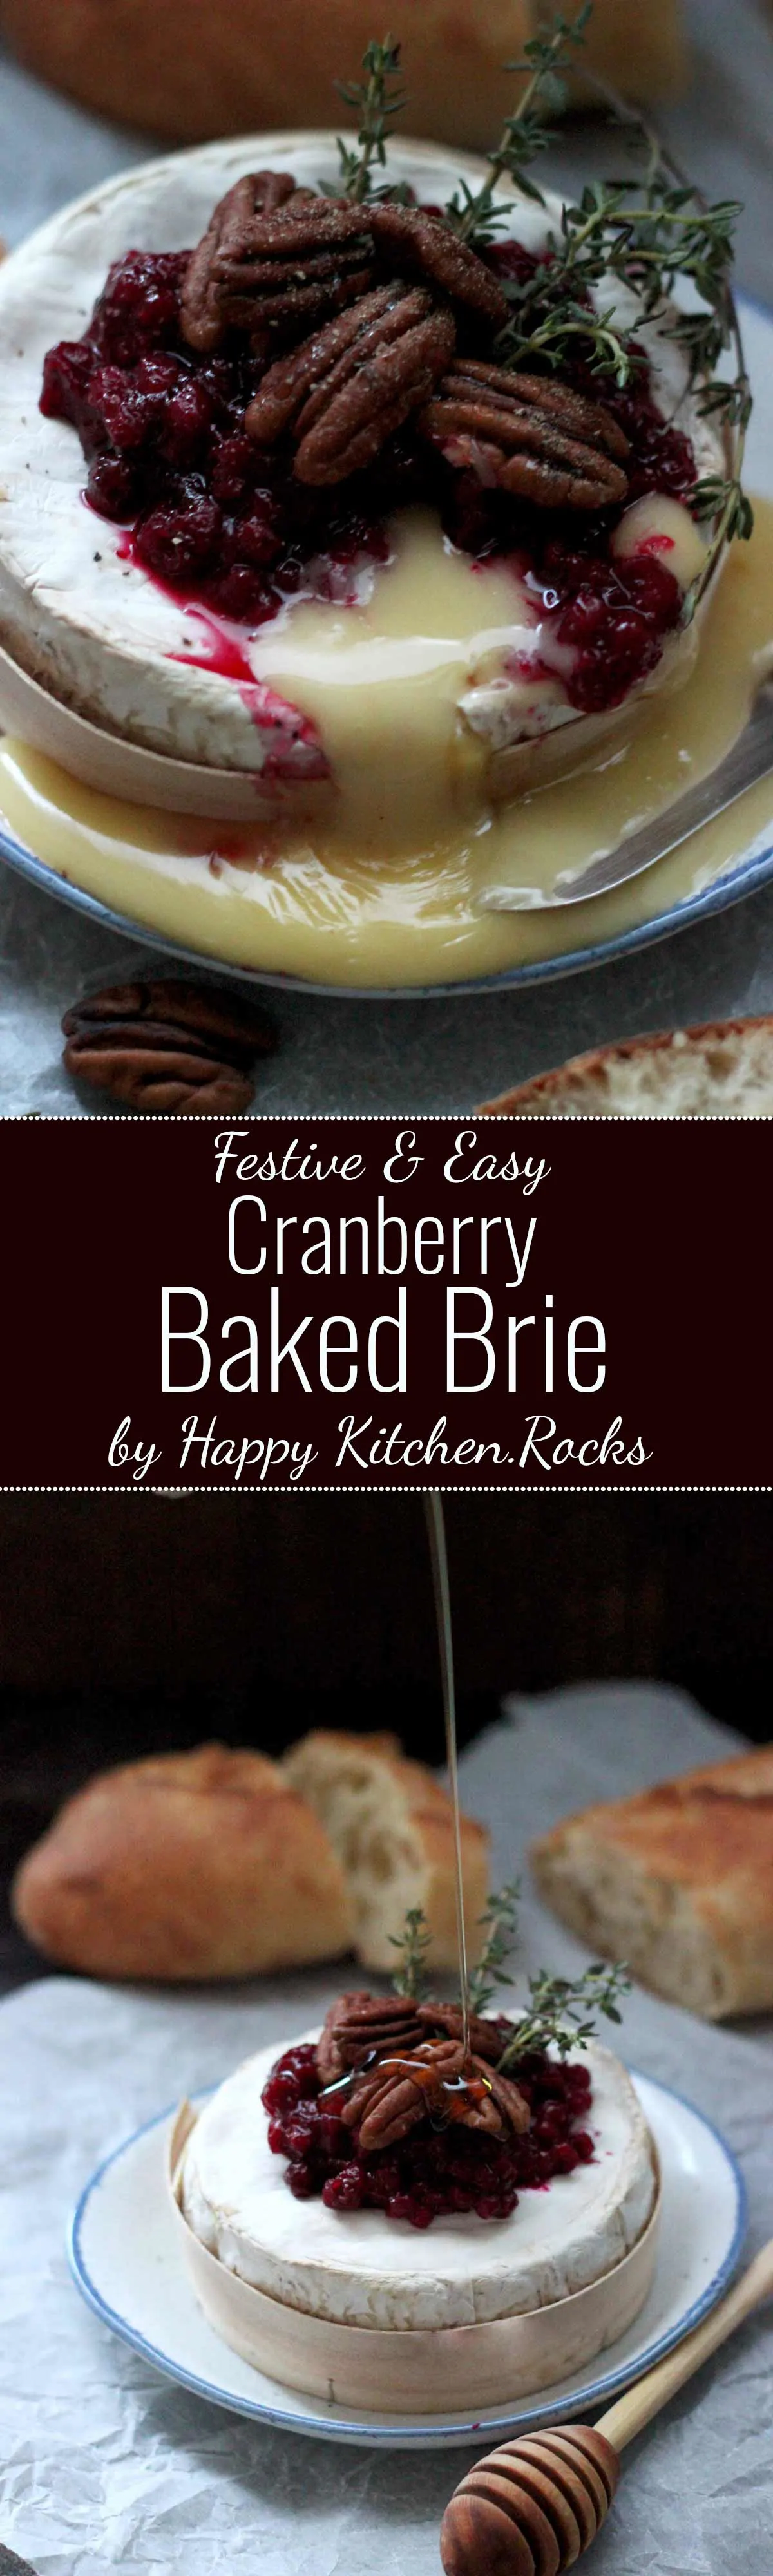 Easy Cranberry Baked Brie with Thyme Super Long Image for Pinterest